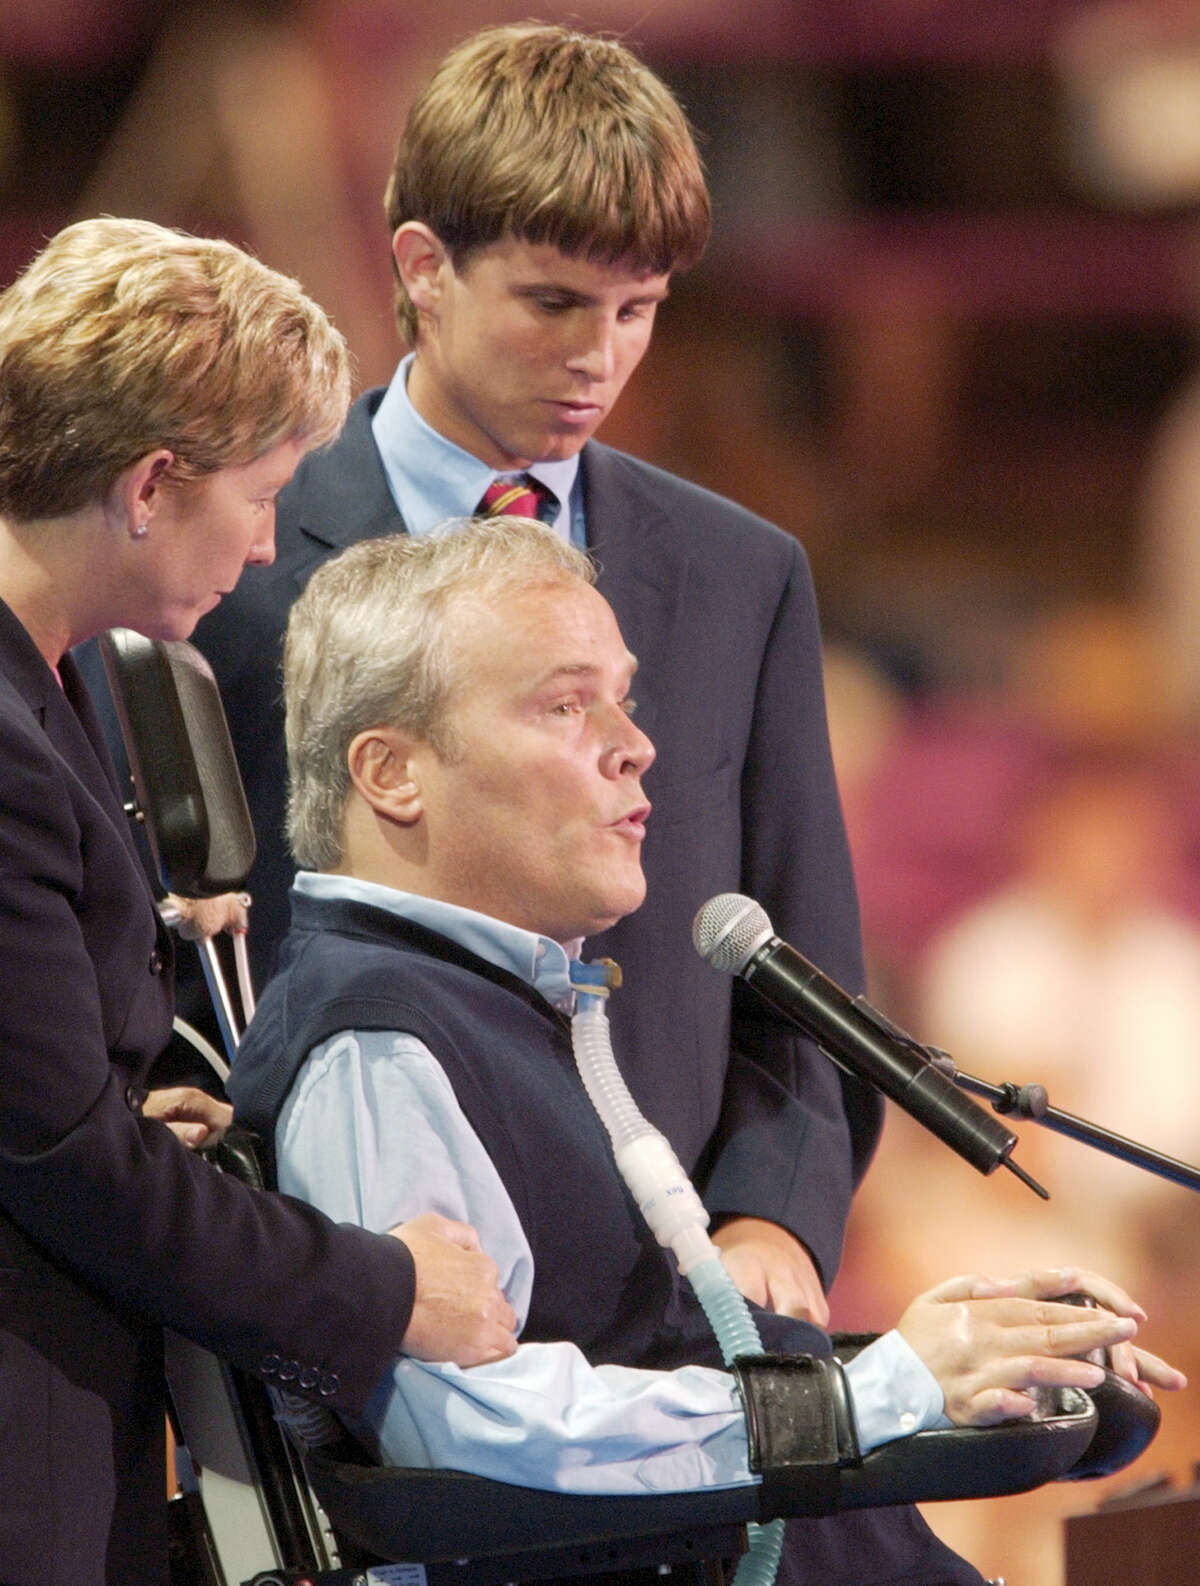 Disabled former New York City police officer Steven McDonald addresses delegates, as family members stand beside him at Madison Square Garden during the Republican National Convention in New York in 2004. McDonald, who was paralyzed by a bullet and became an international voice for peace after he publicly forgave the gunman, died Tuesday, Jan. 10, 2017, at the age of 59.